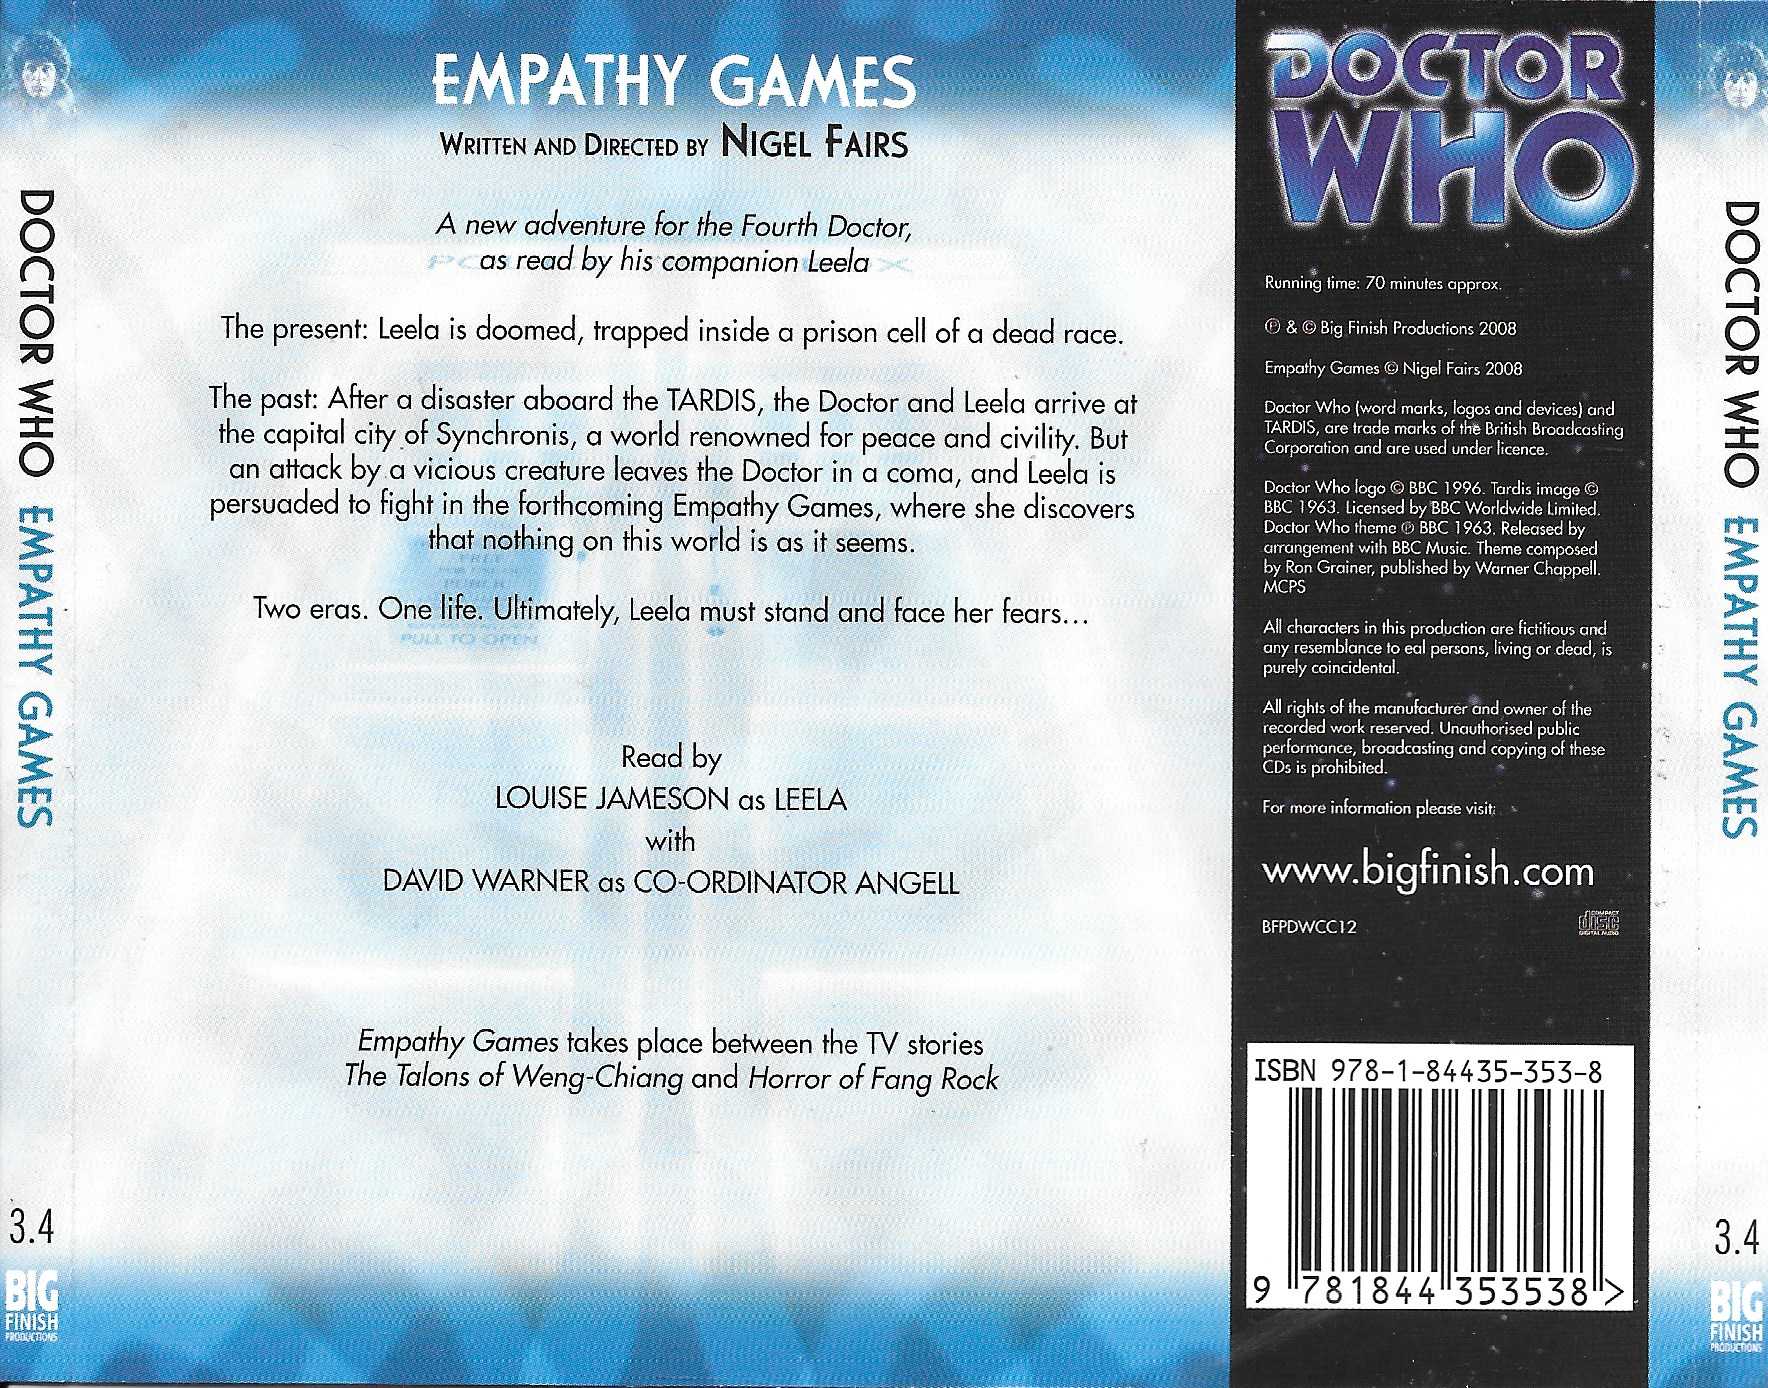 Picture of BFPDWCC12 Doctor Who - Empathy games by artist Nigel Fairs from the BBC records and Tapes library